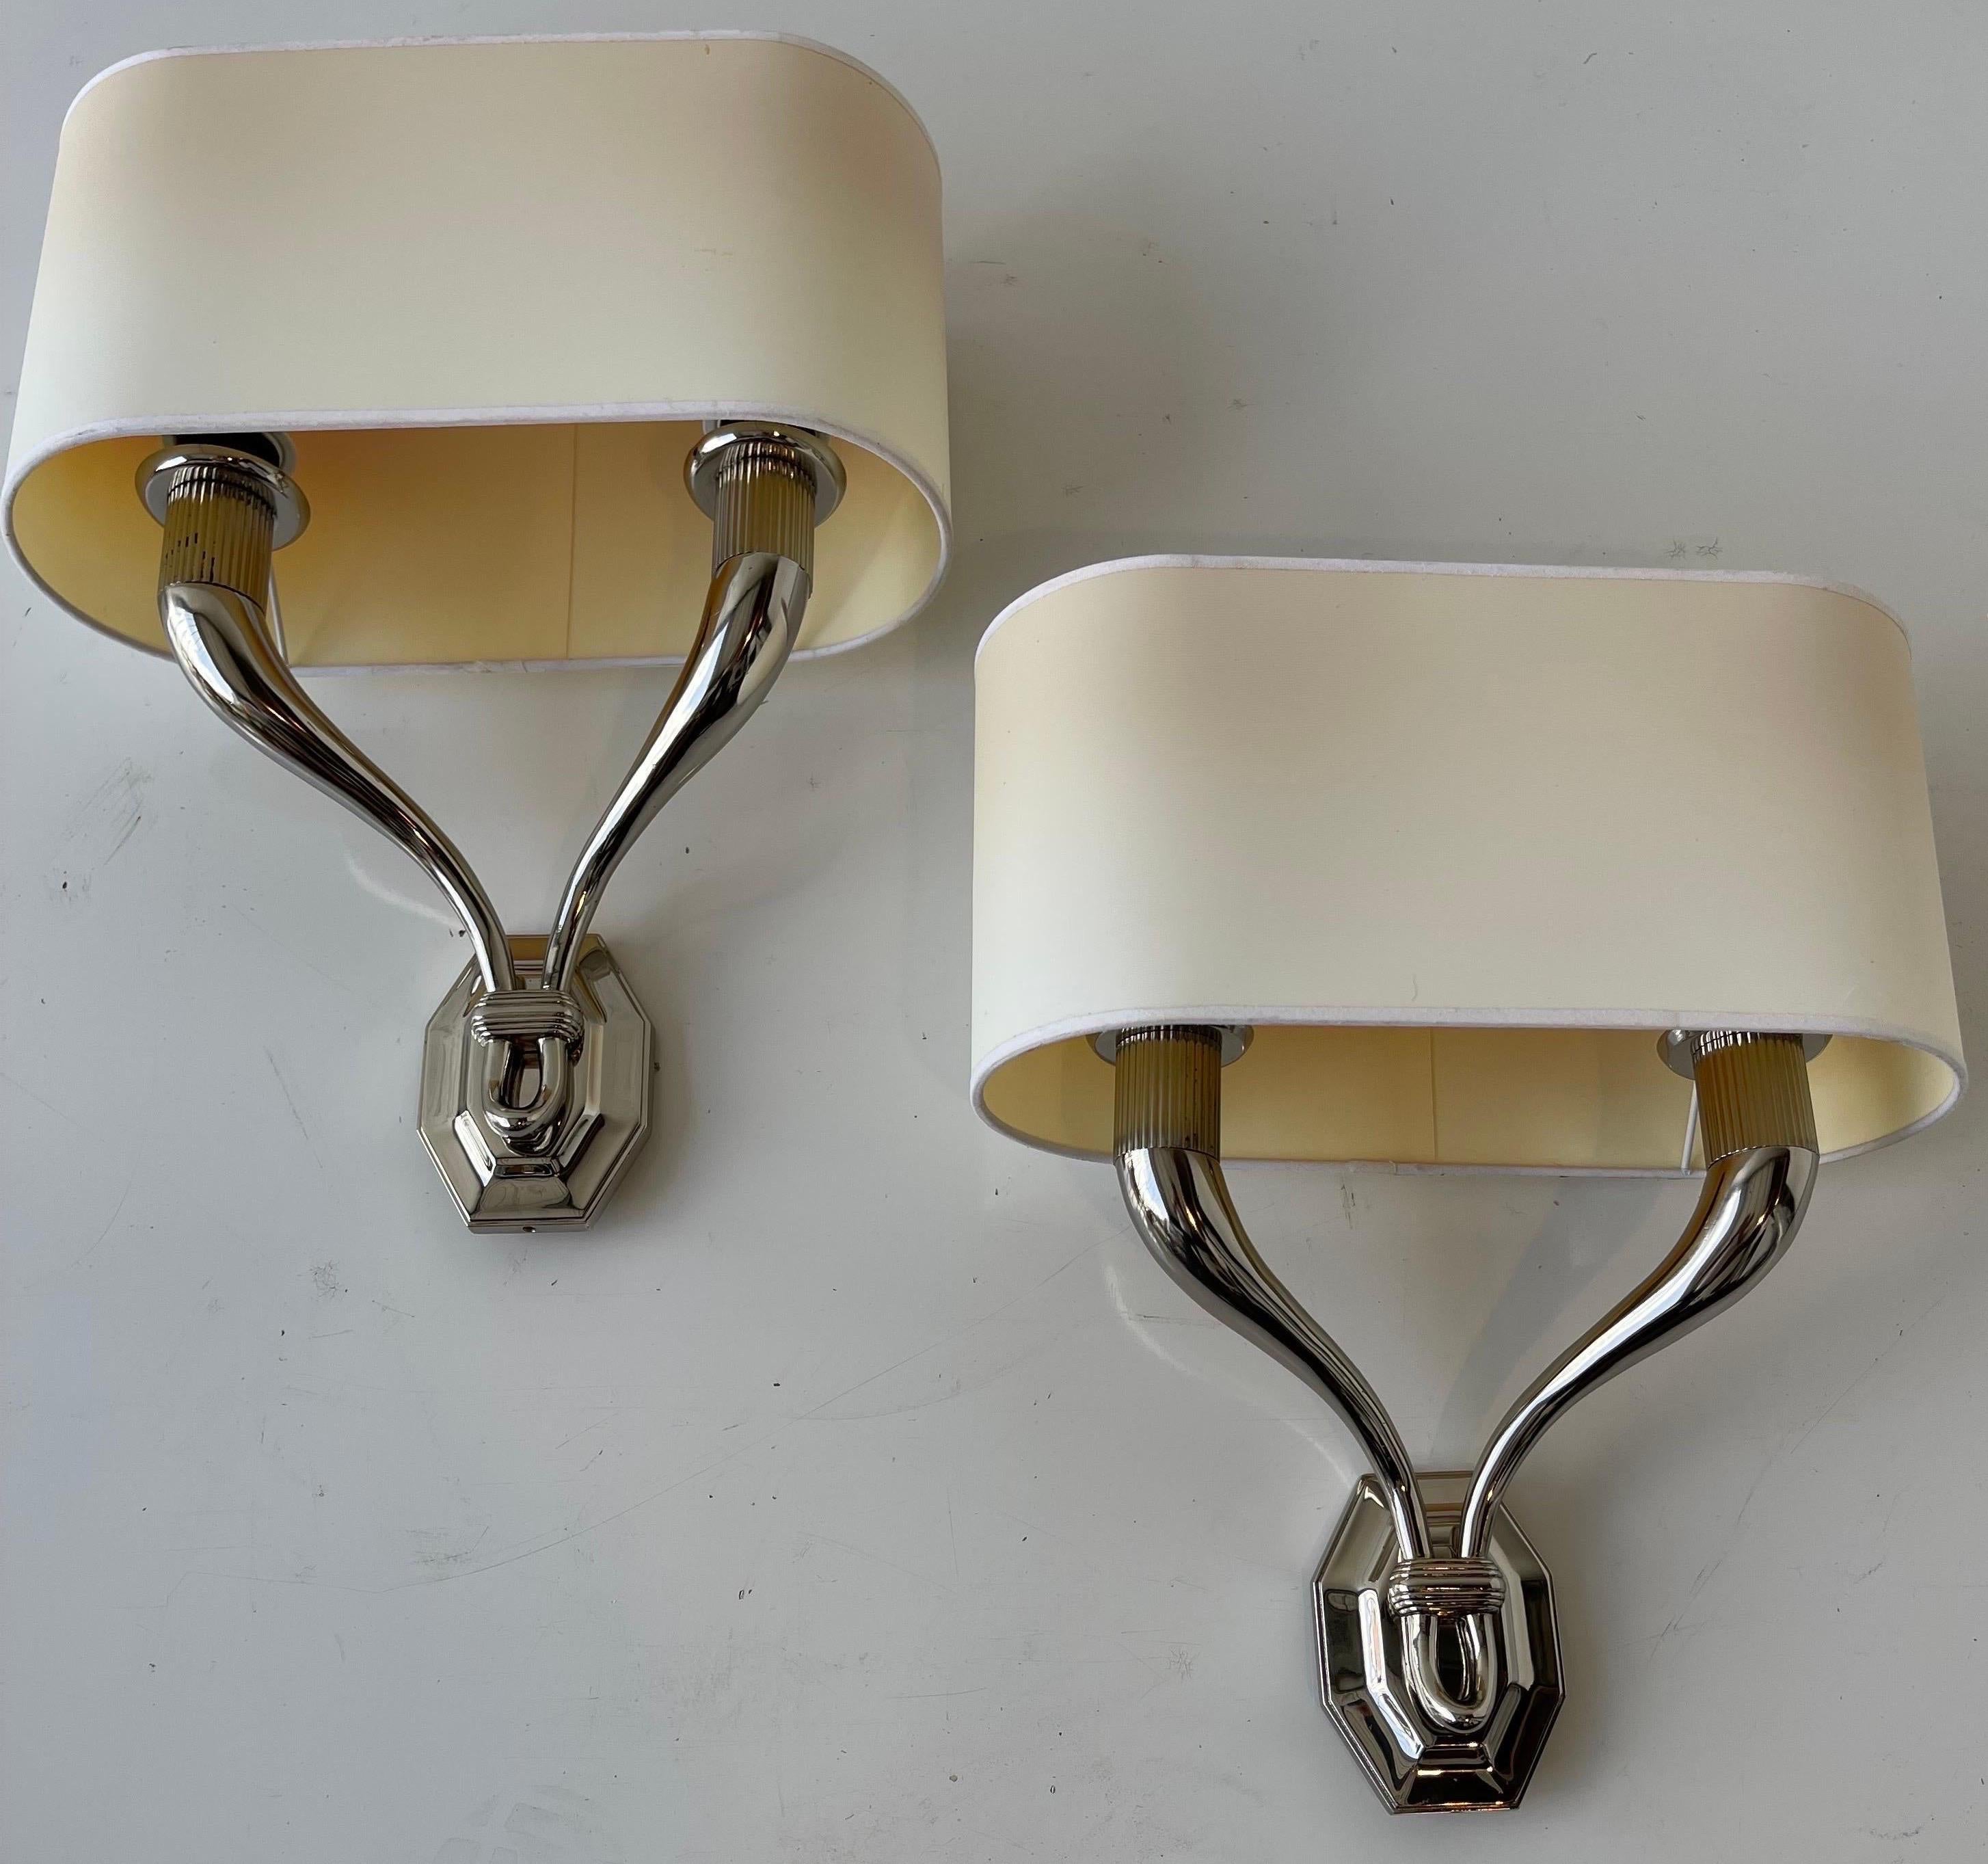 Pair of Pierre Yves Rochon nickel plated brass French sconces.
Specially made for a prestigious palace in Paris.
In the style of Rulhman.
US rewired and in working condition.
2 Sockets. 60 watts max bulb.
5 Pairs available.